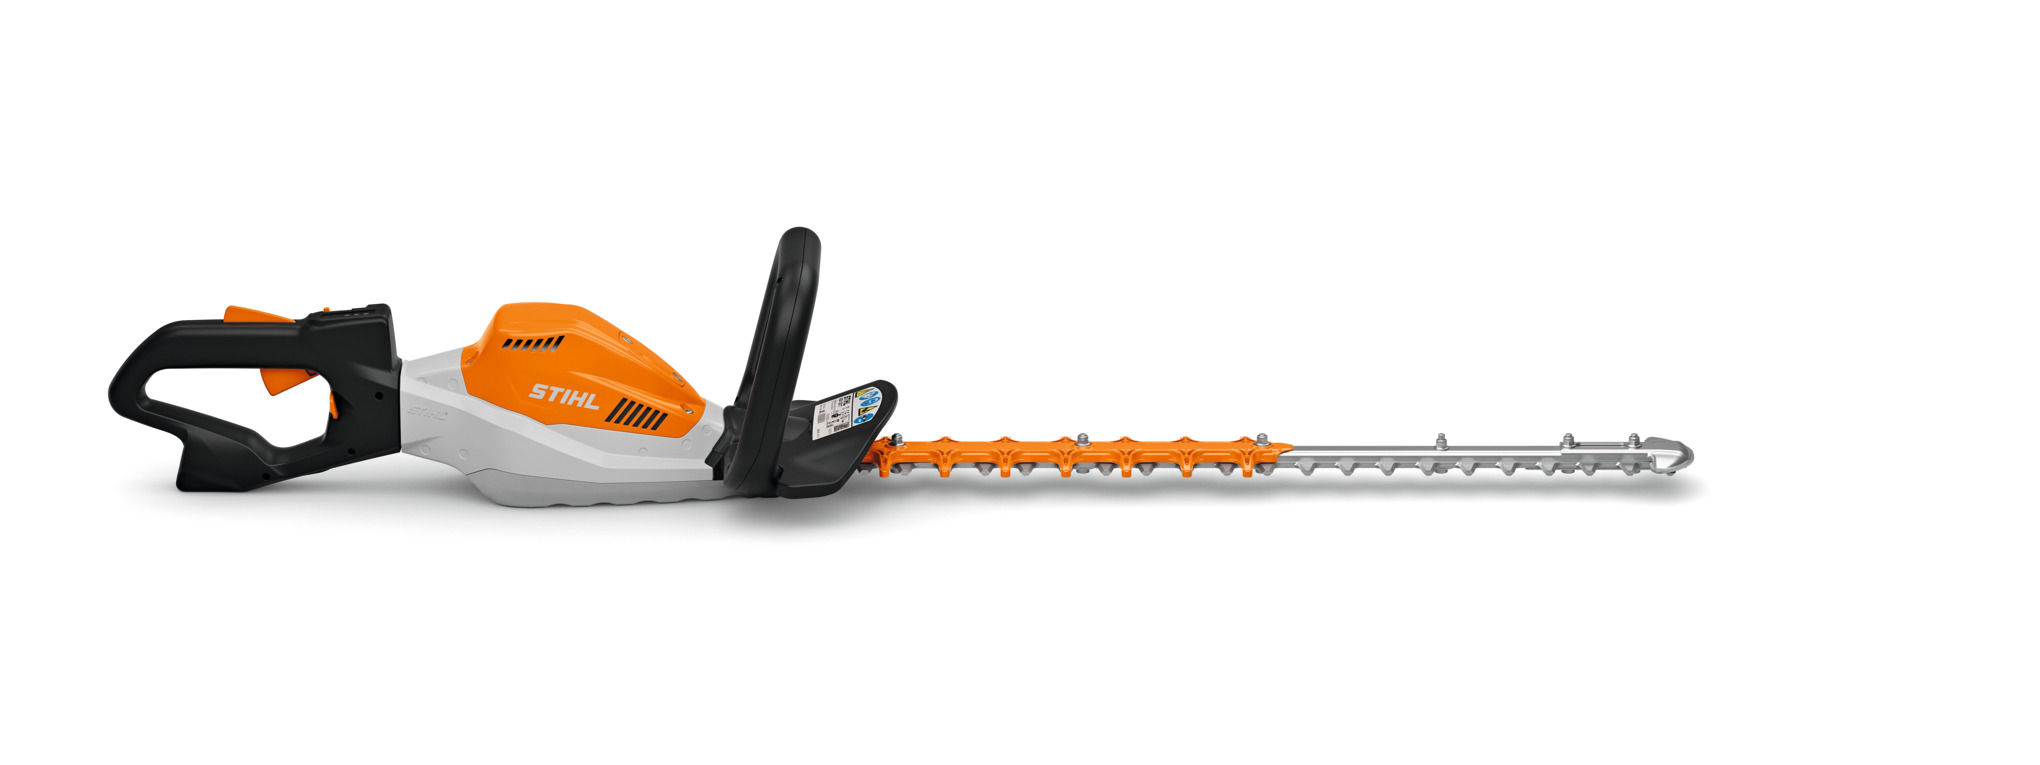 HSA 130 T Cordless Hedge Trimmer